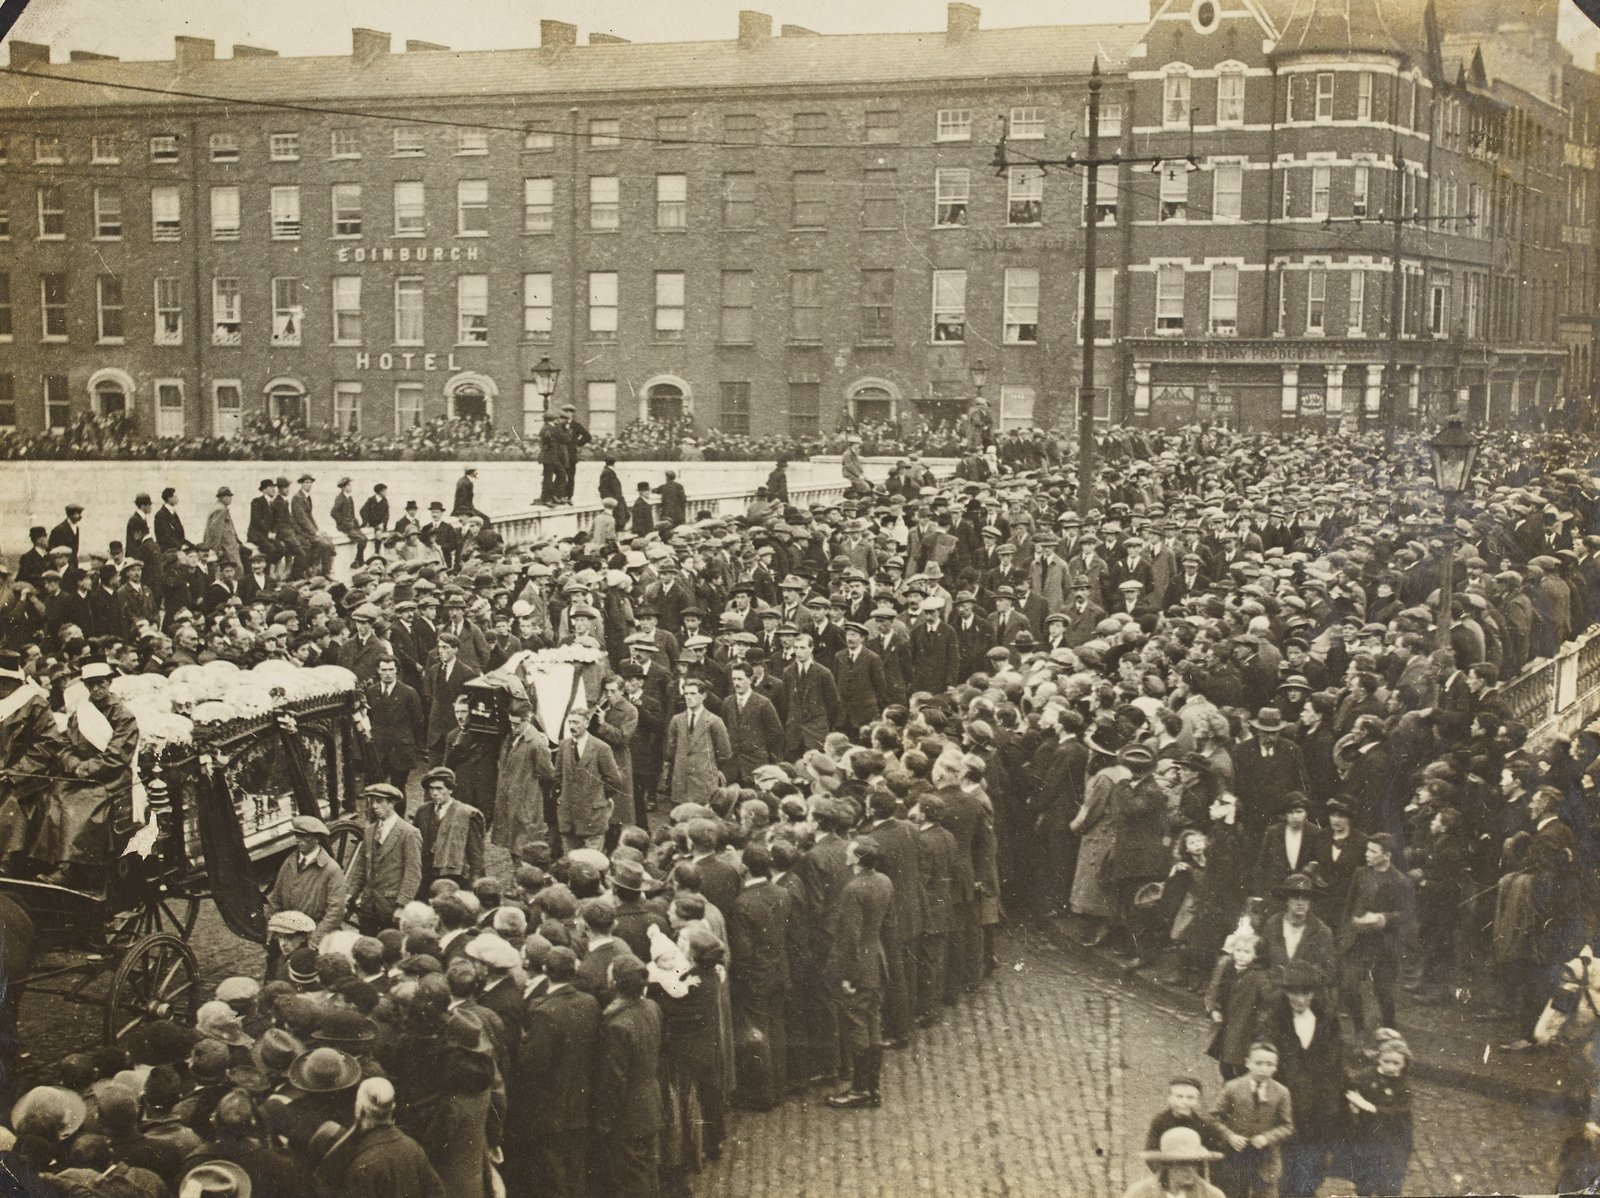 Image - A photograph by Hogan of the funeral of a prominent Republican passing over St. Patrick's Bridge, Cork Image courtesy of the National Library of Ireland